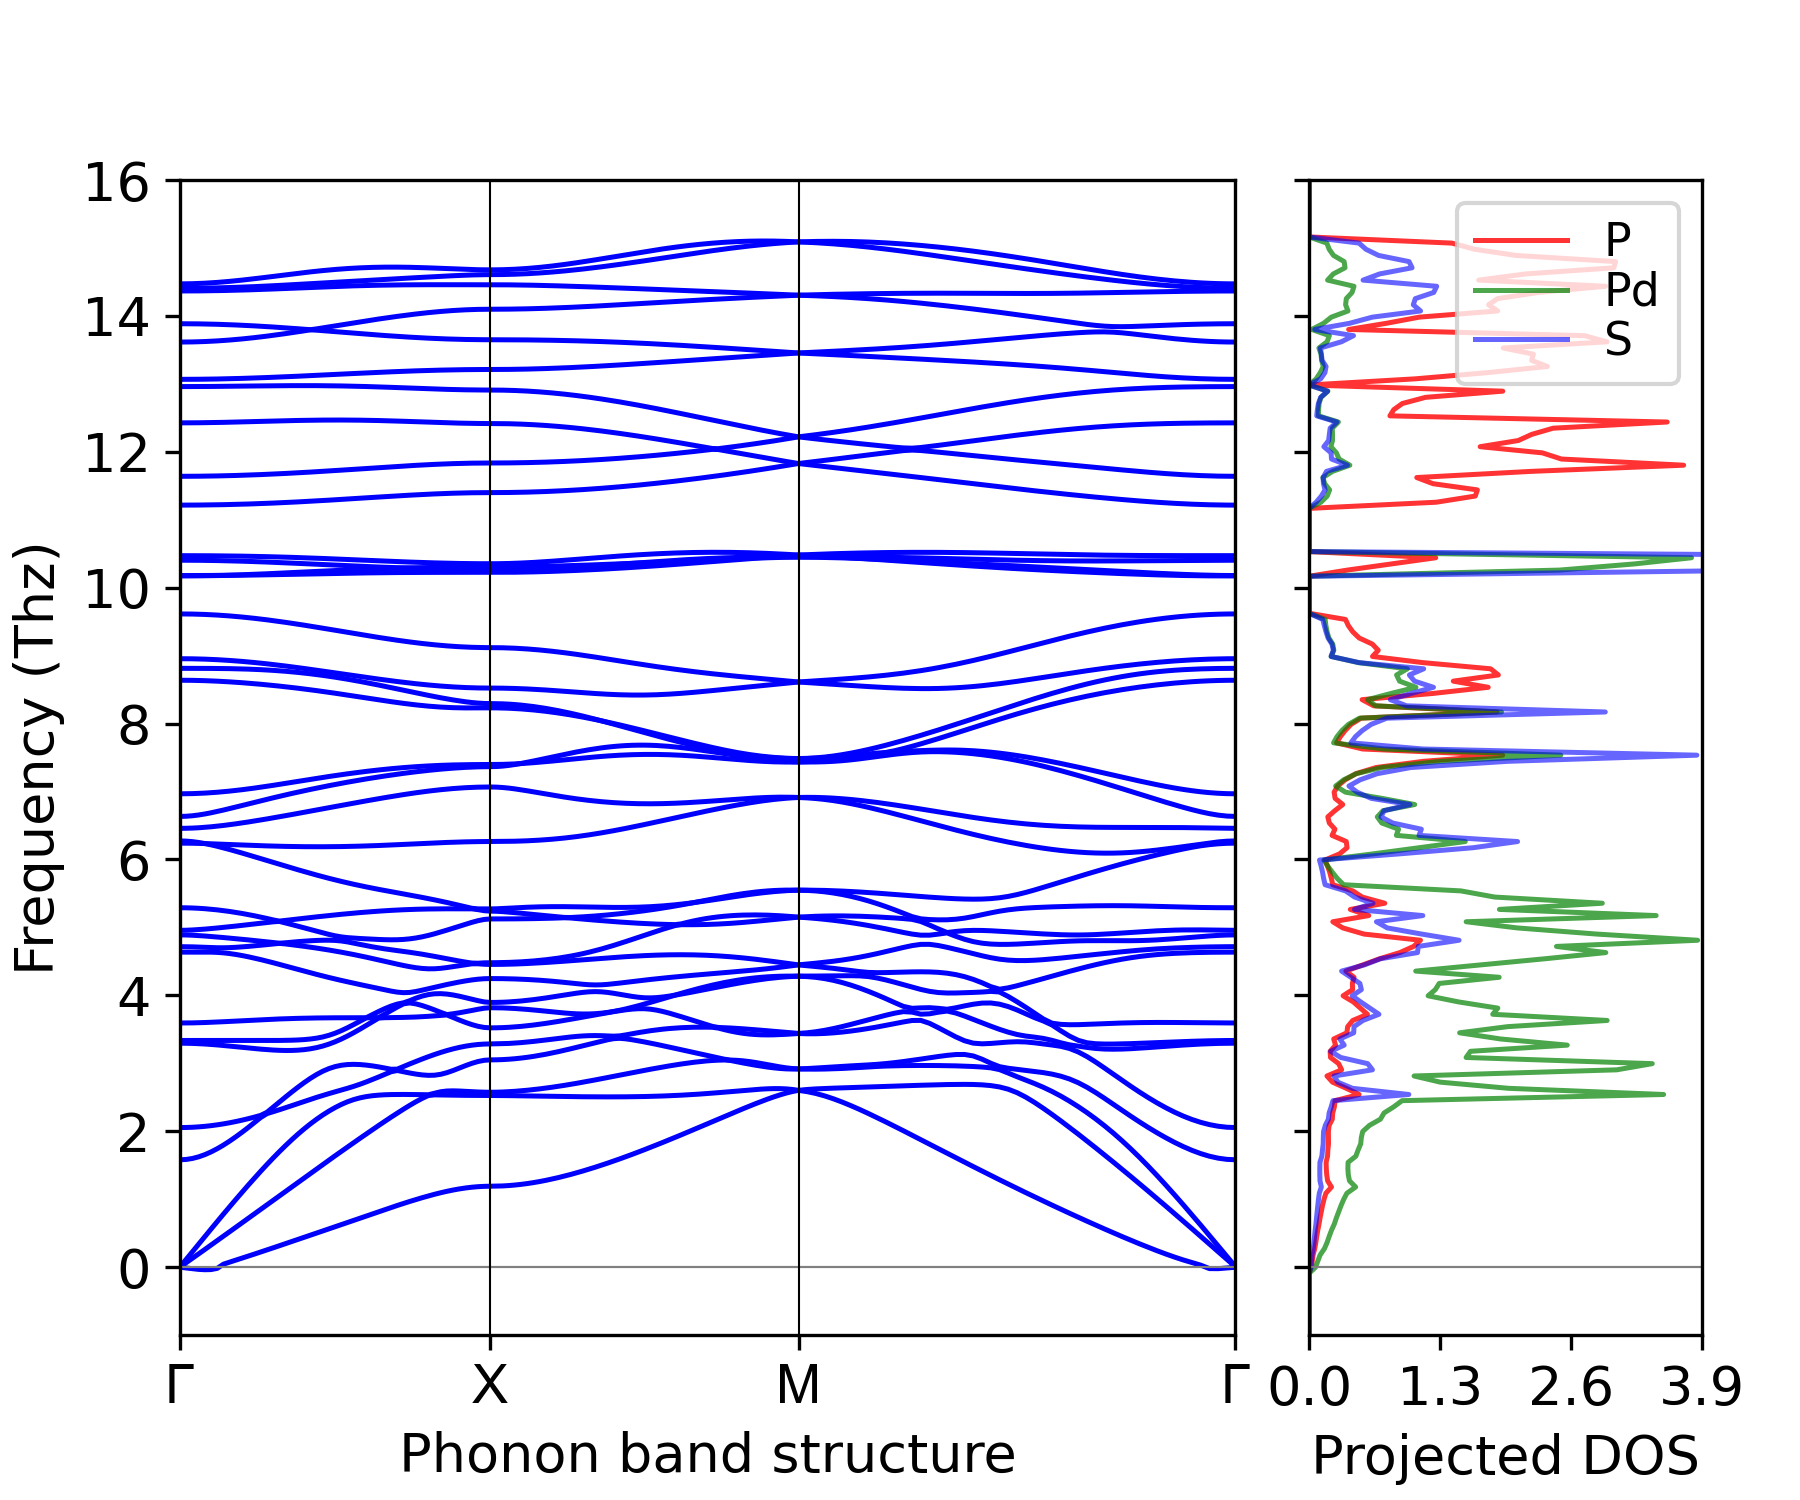 ../_images/phonon_BAND_LDOS-PPdS_P2^c.png